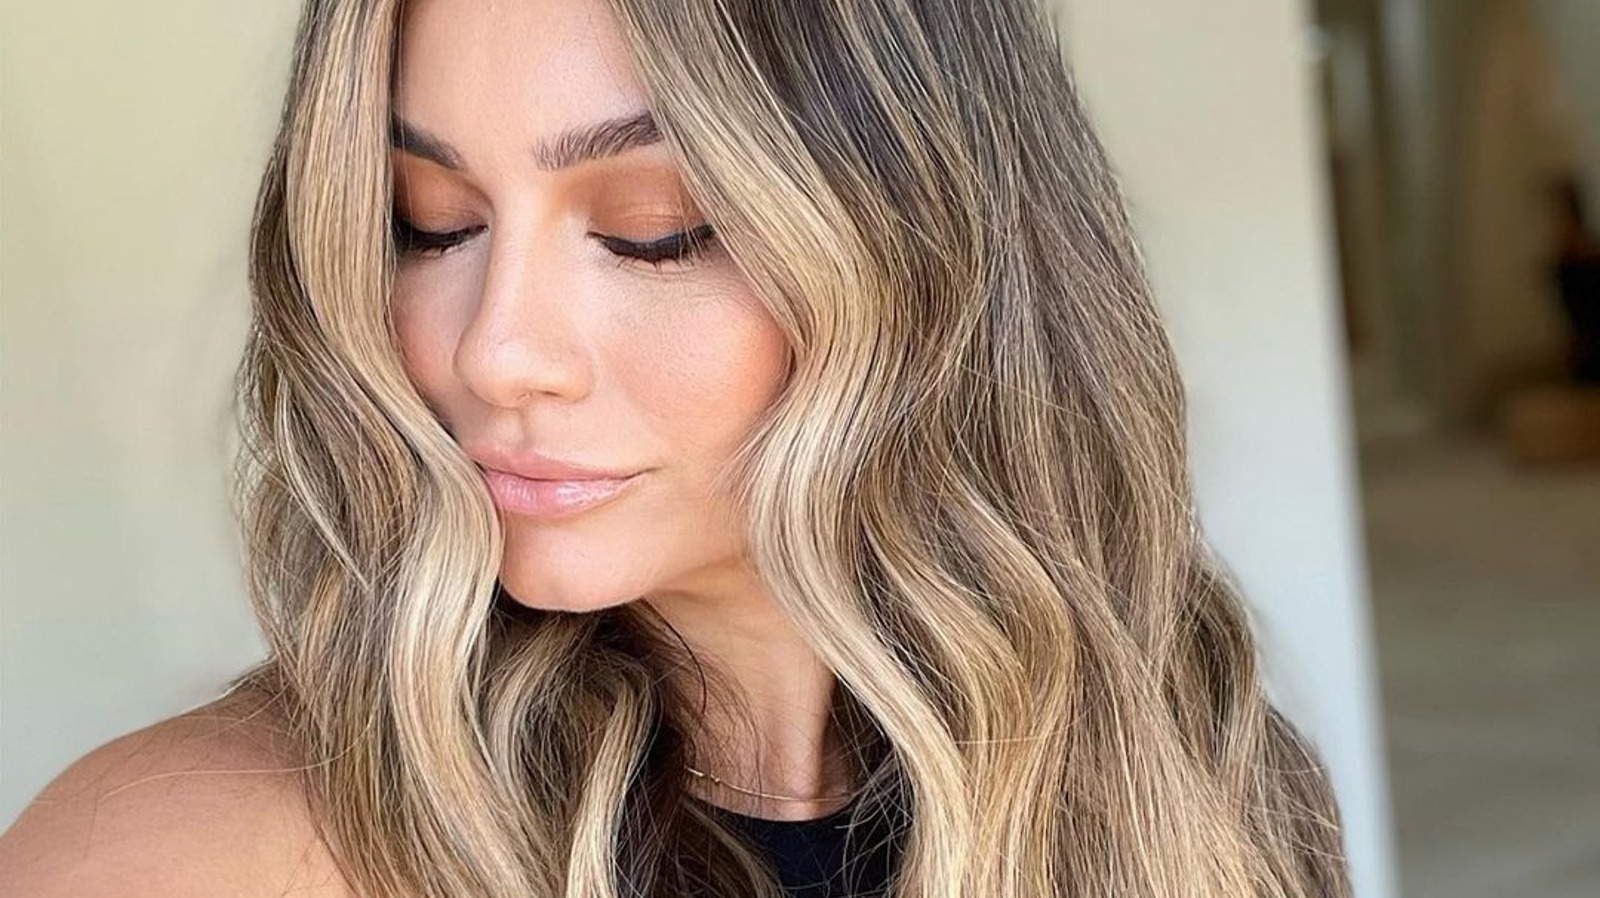 Reverse Balayage Is Perfect For A Subtle And Low-Maintenance Look